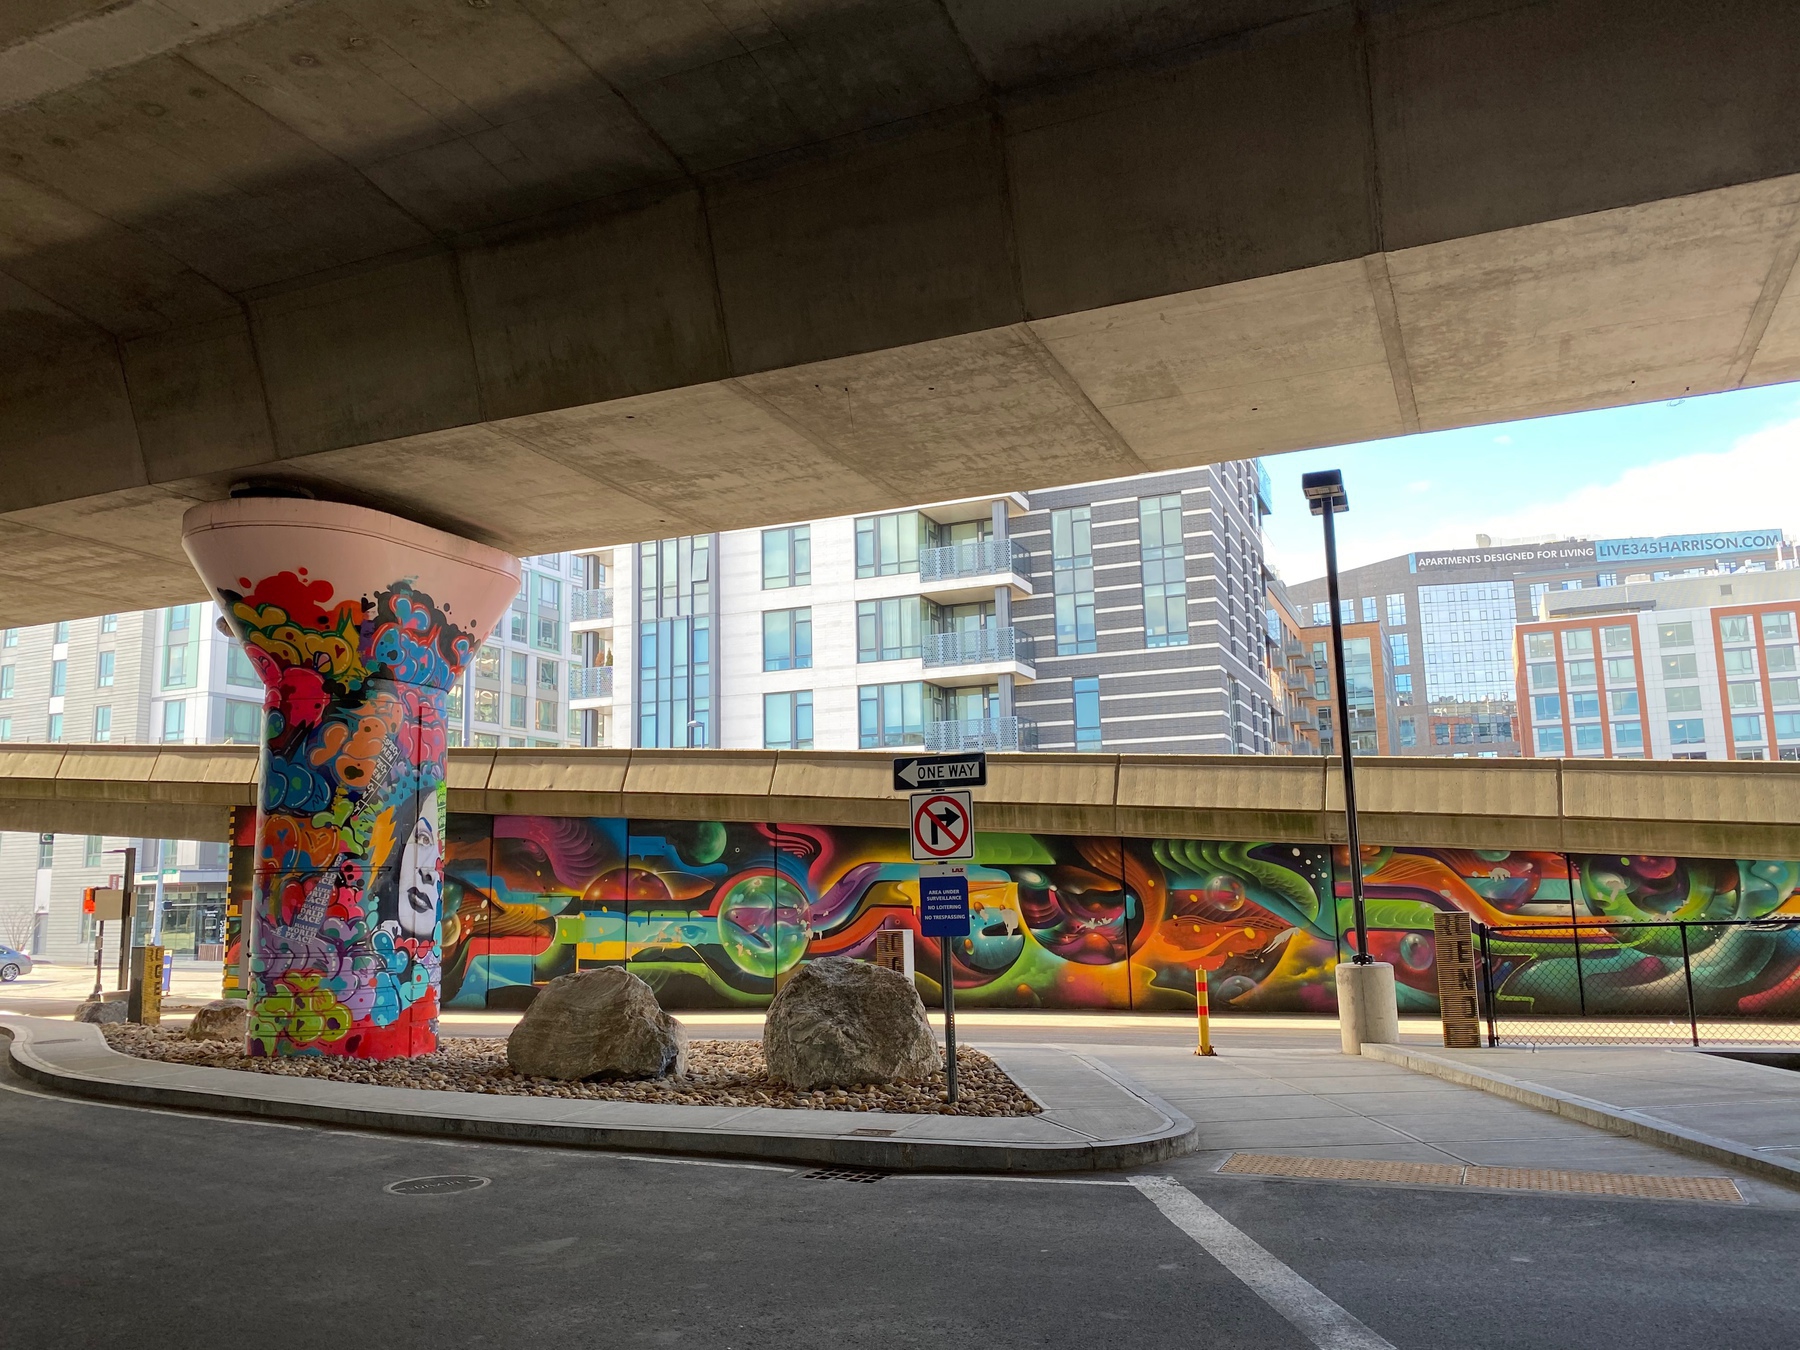 View of a colorful abstract mural under a highway overpass.